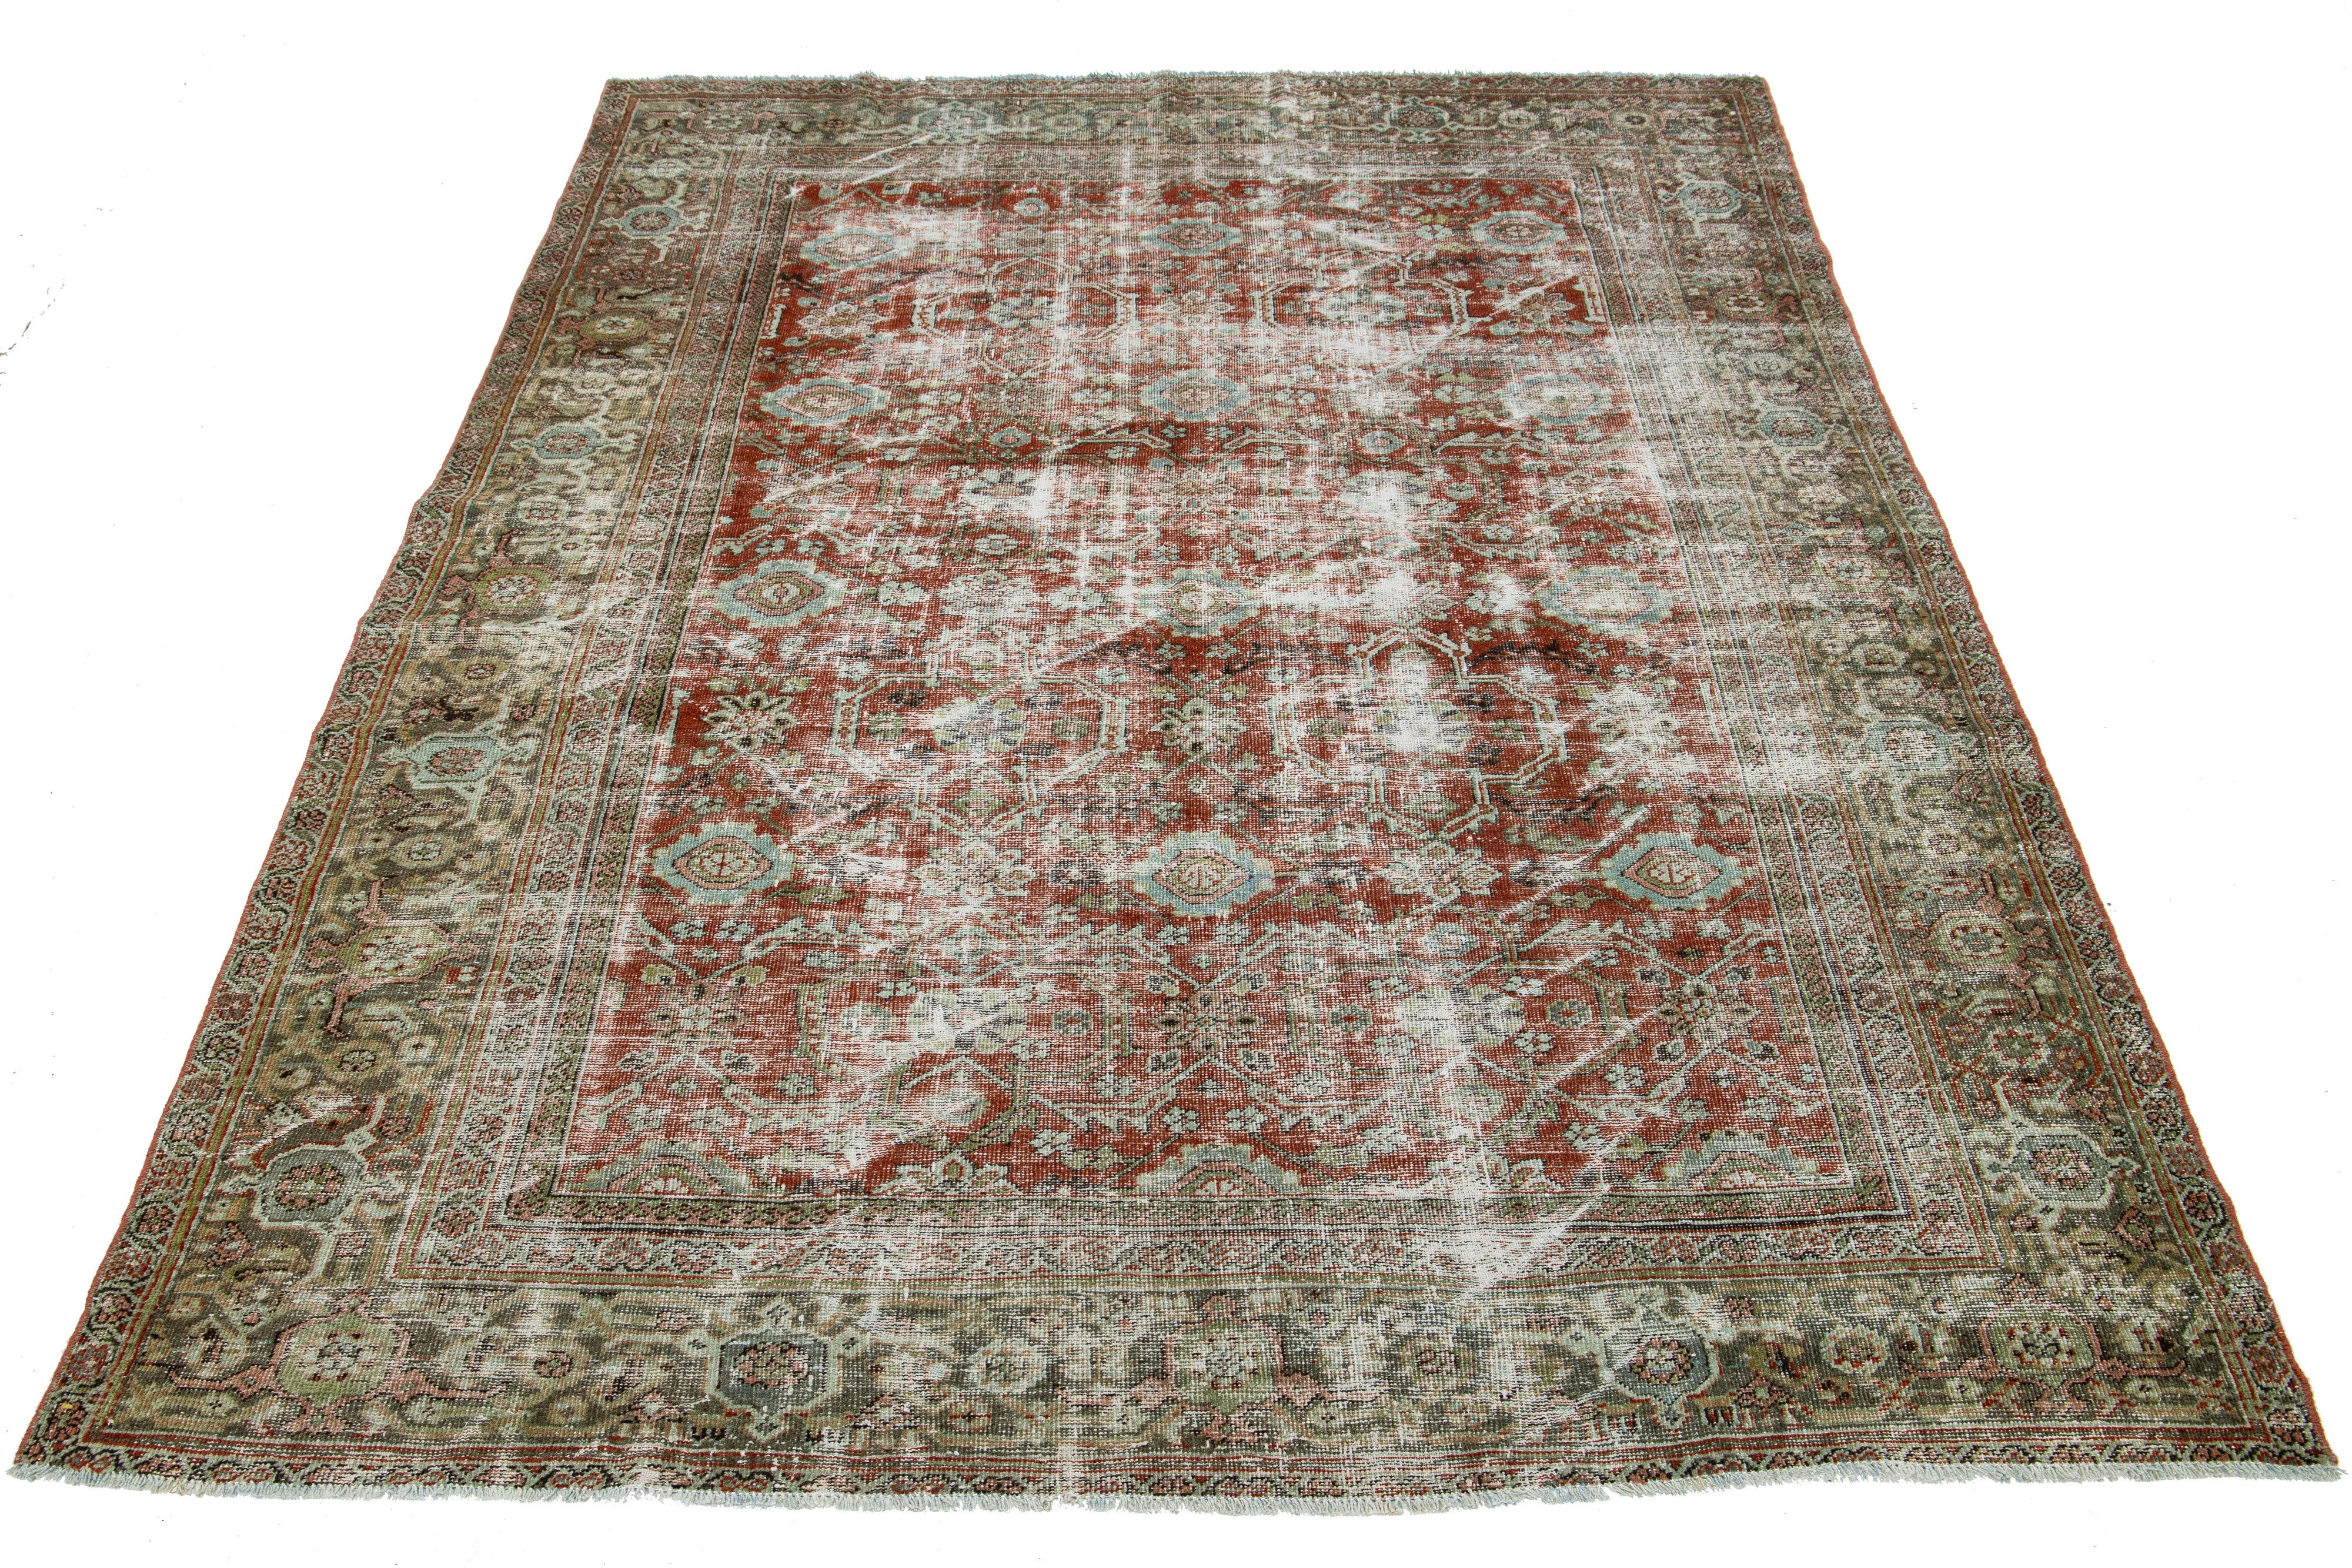 Antique Mahal wool rug with rust field. Floral motif in blue, pink, and green hues.

This rug measures 6'9